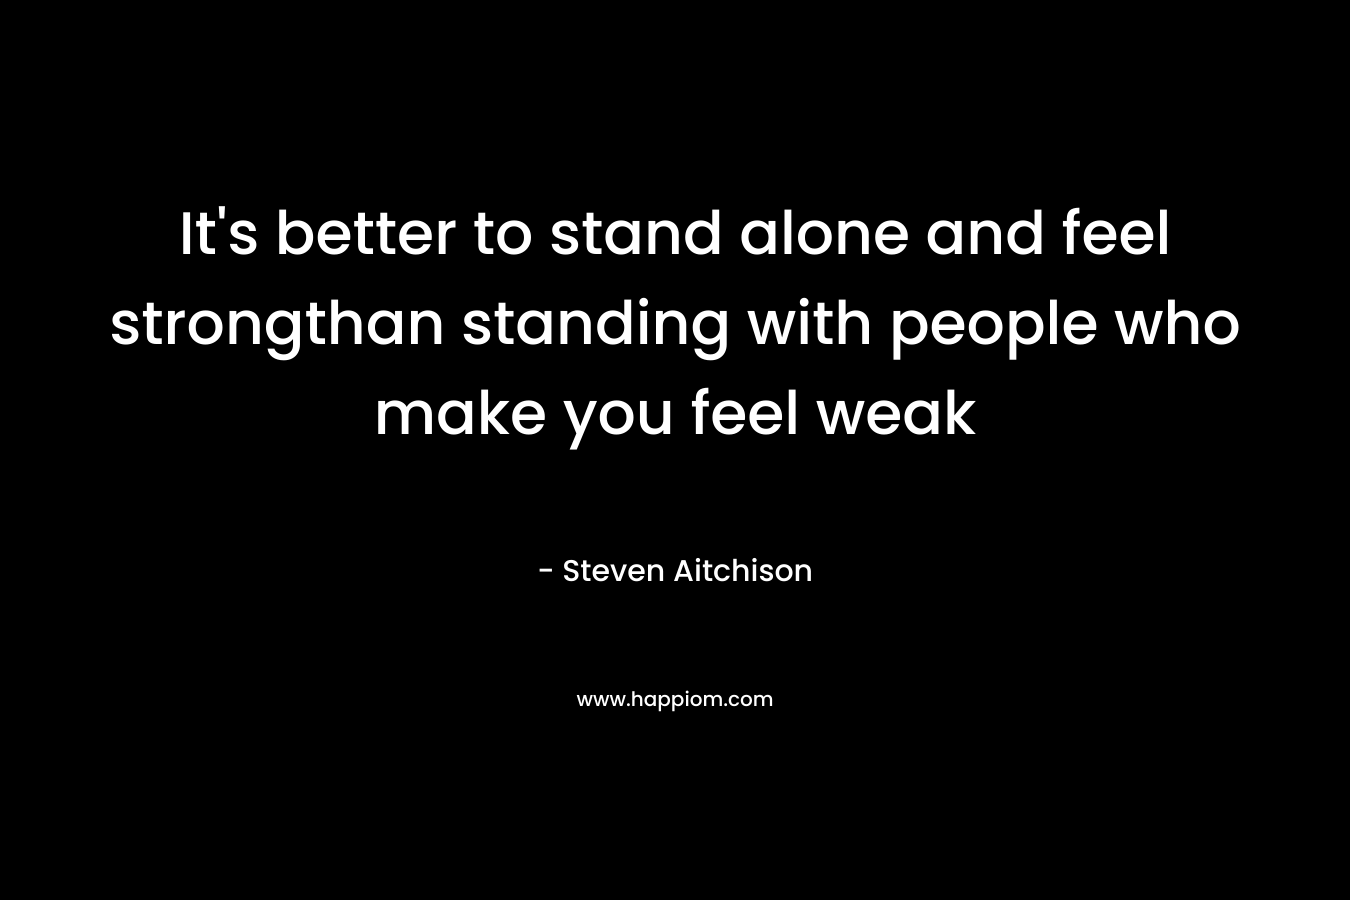 It's better to stand alone and feel strongthan standing with people who make you feel weak